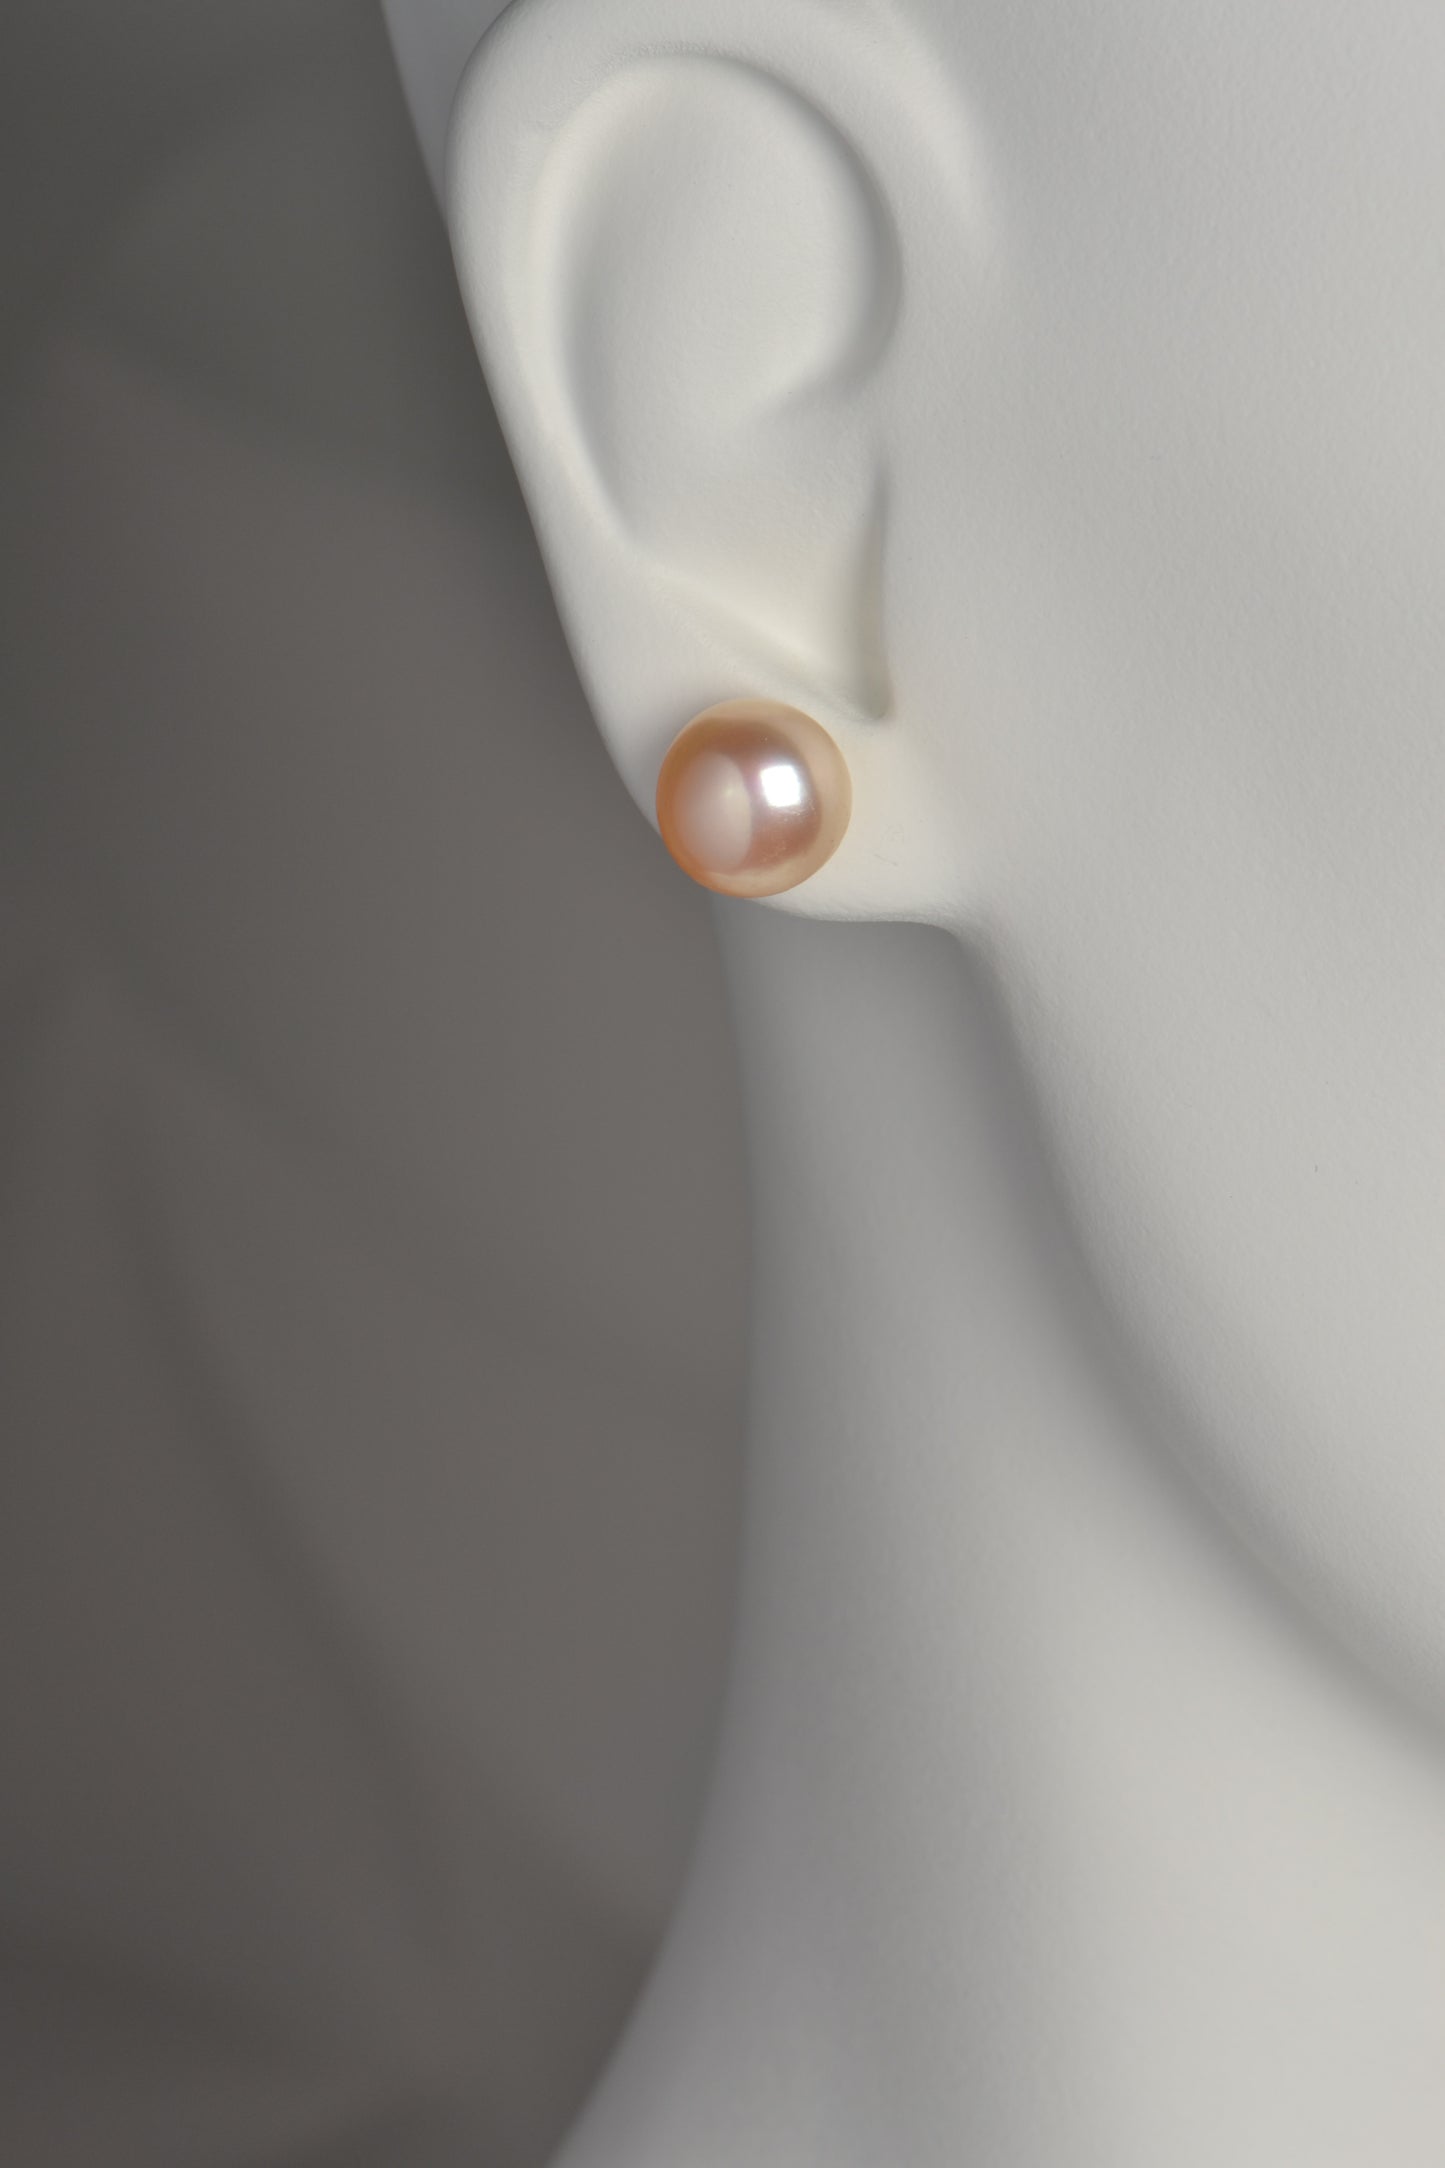 large peach pearl earrings photographed in the earlobe. They cover most of the lobe entirely.